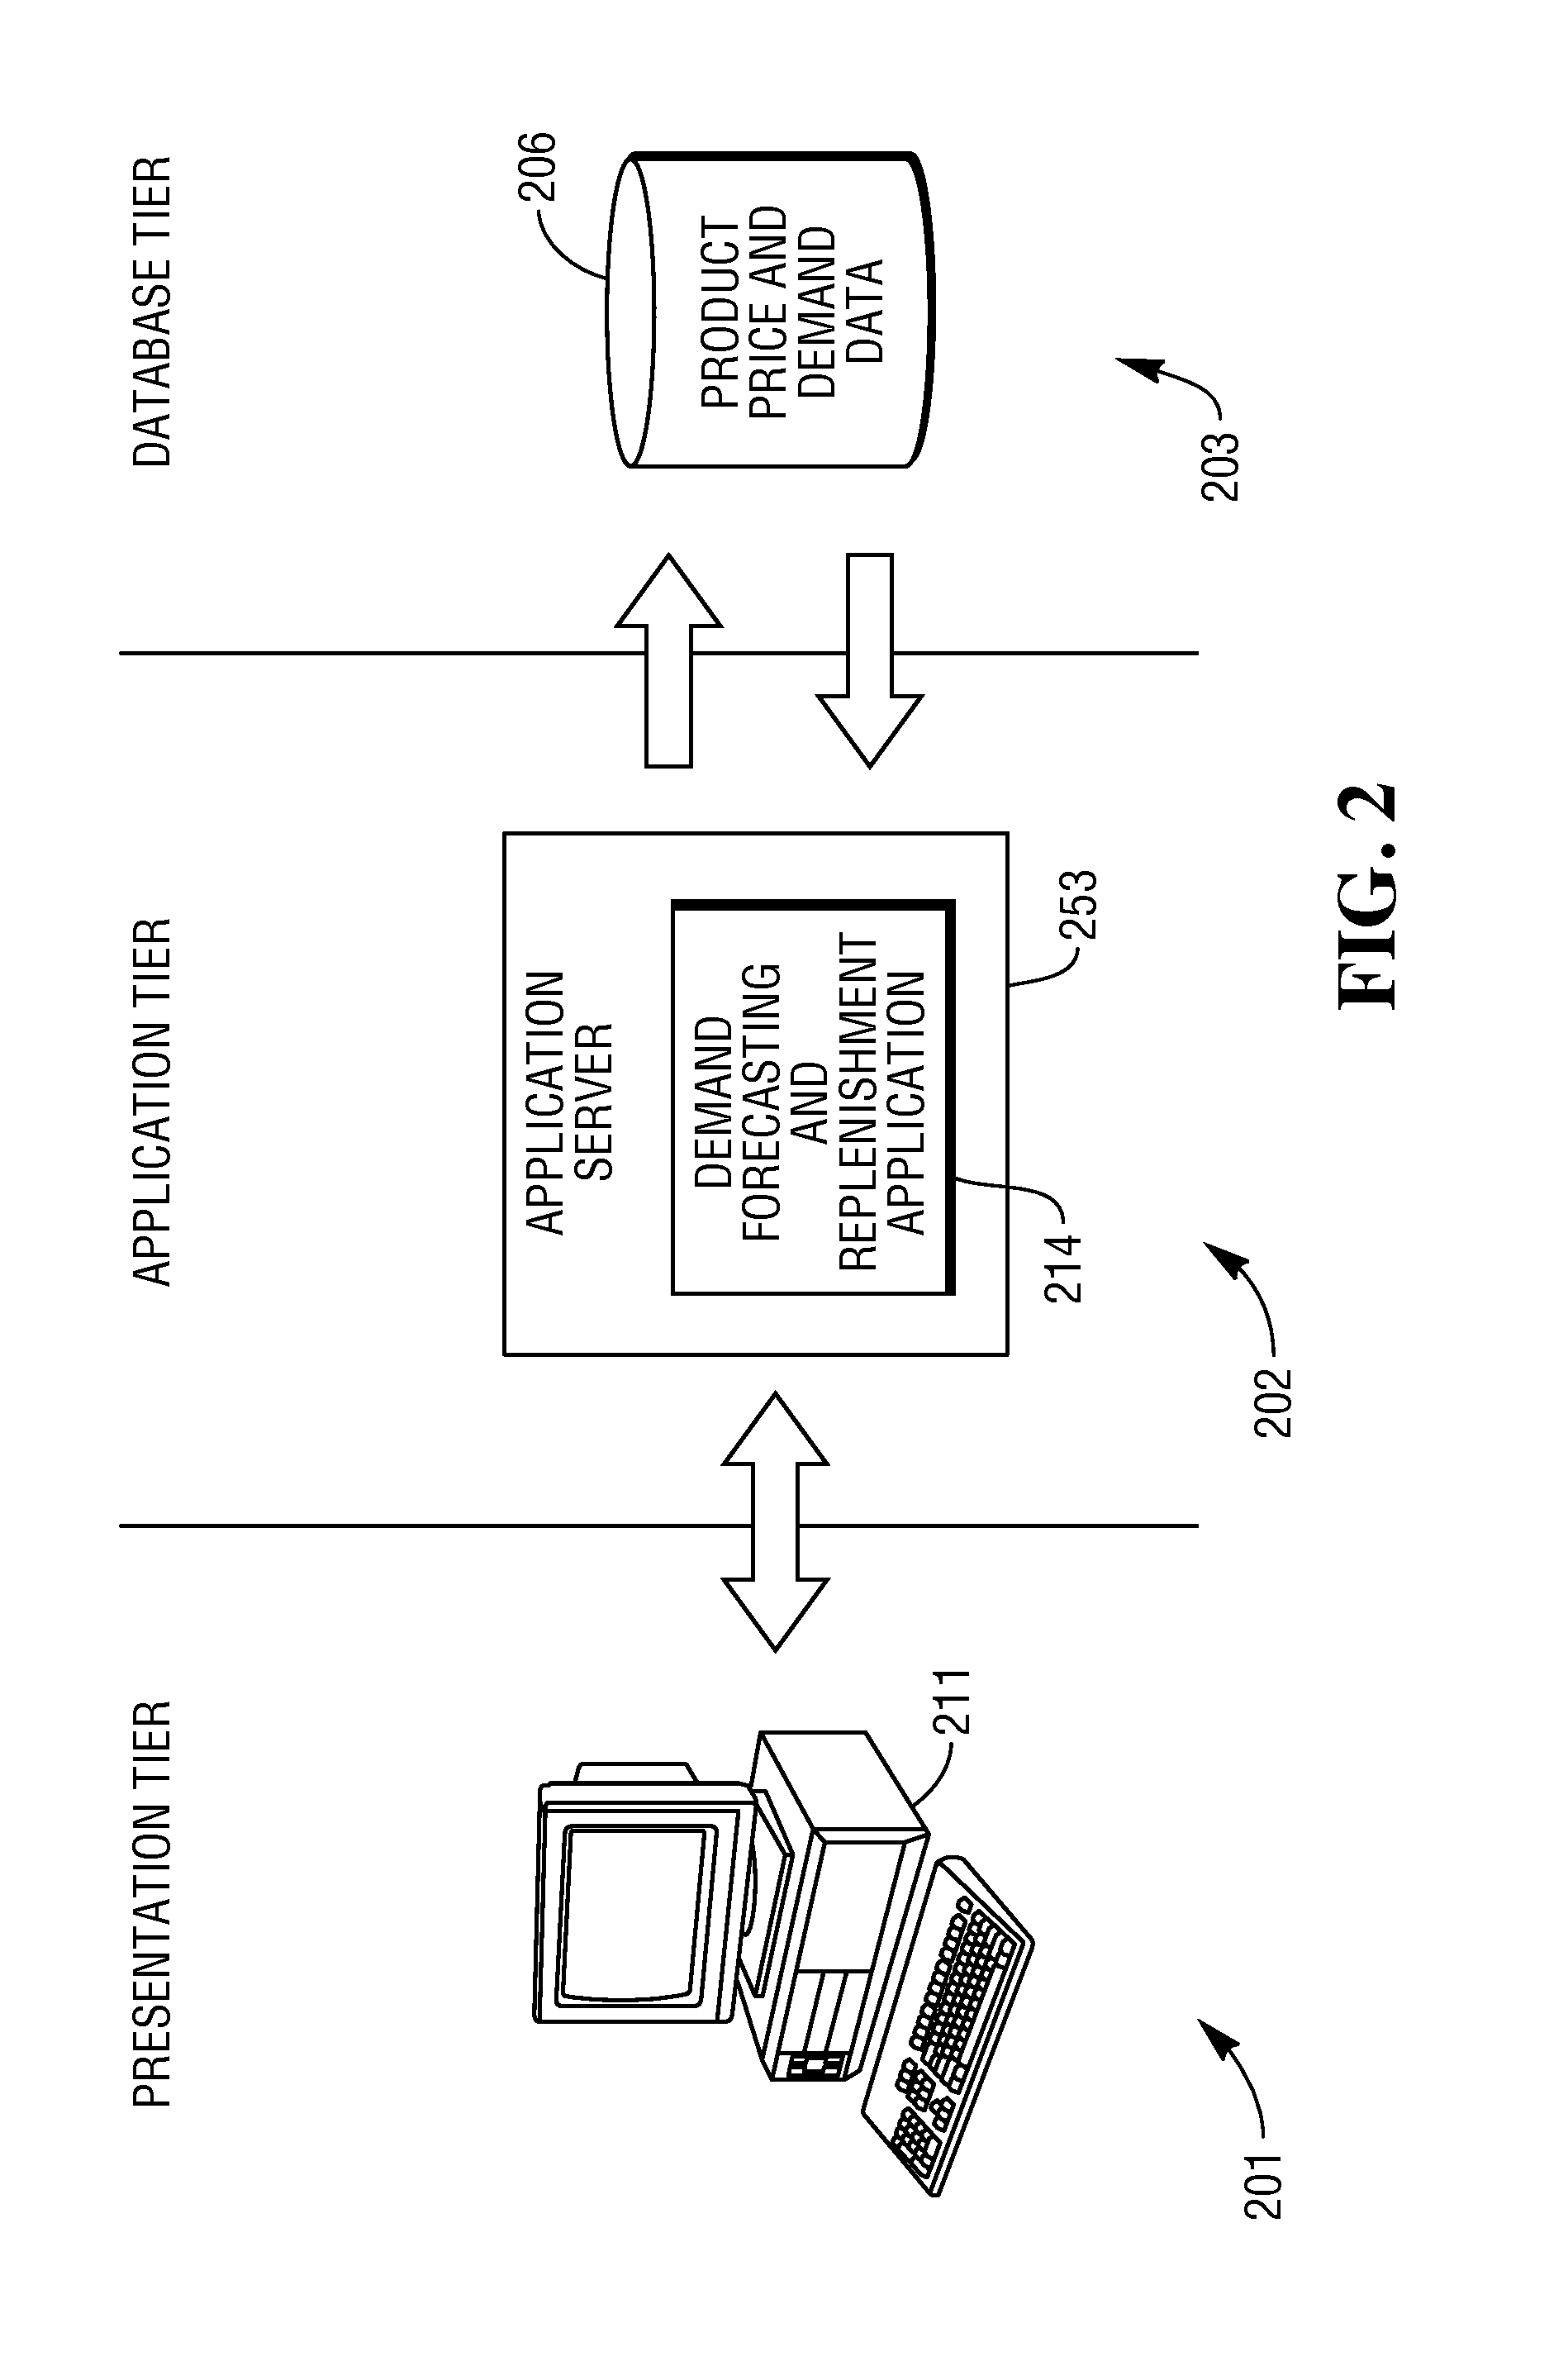 Method and system for optimizing product inventory cost and sales revenue through tuning of replenishment factors